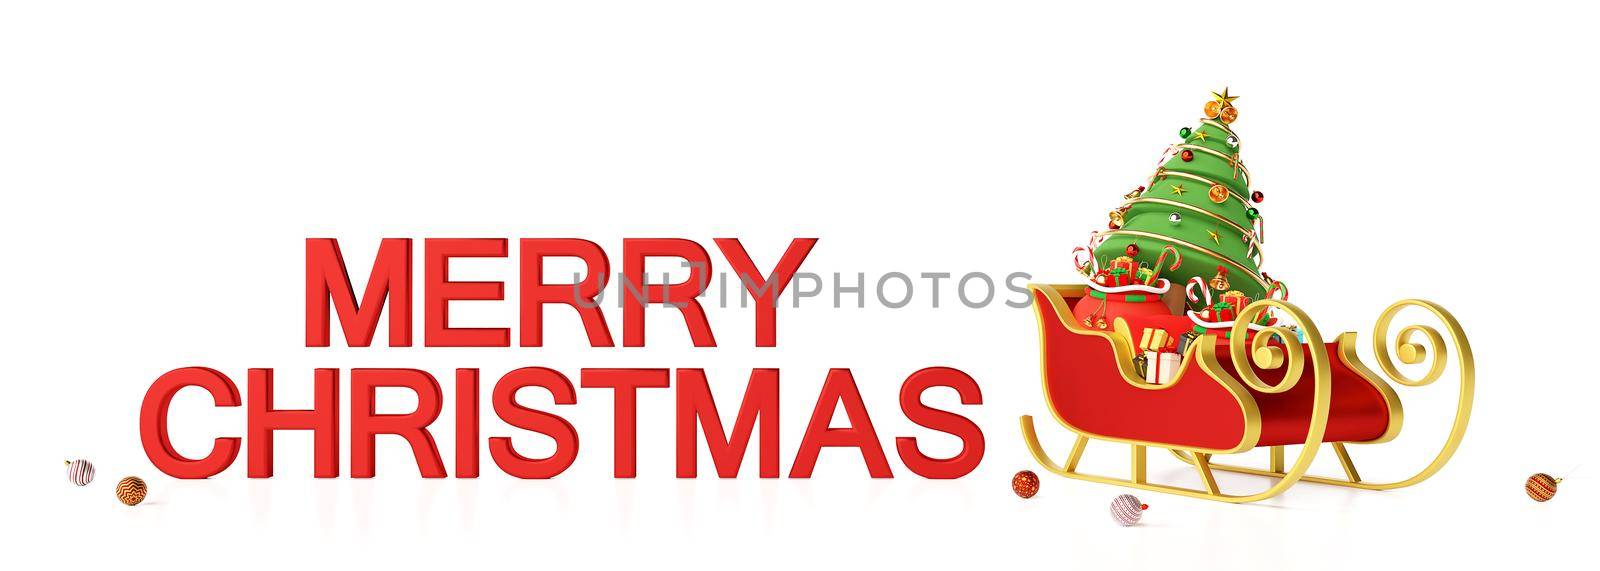 Christmas banner background of sleigh and gifts with text Merry Christmas, 3d rendering by nutzchotwarut